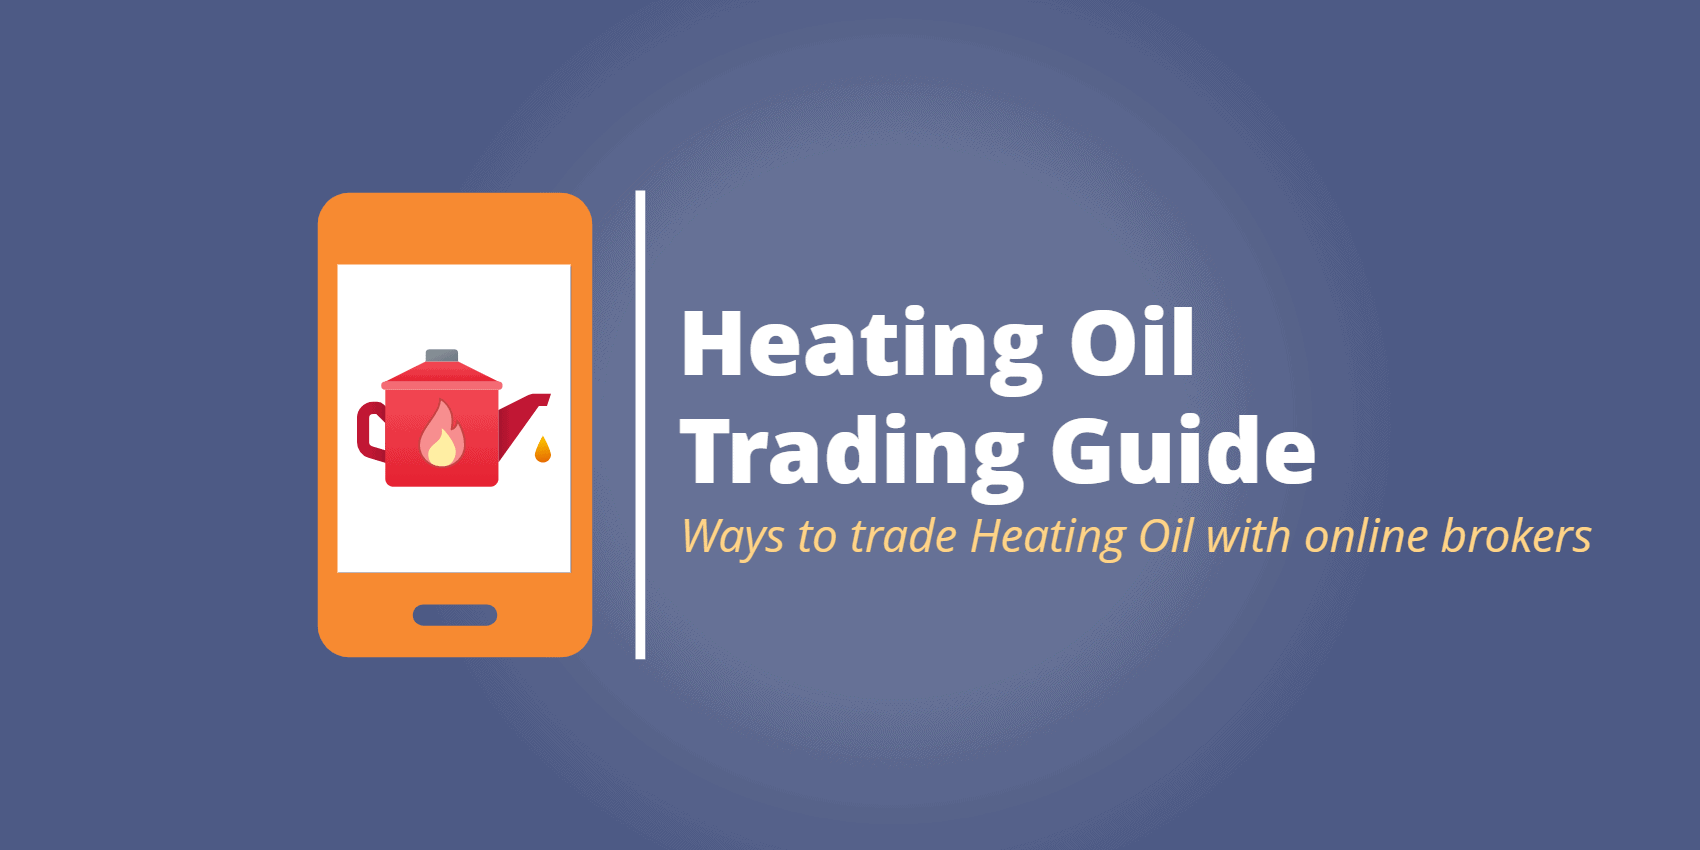 Why Trade Heating Oil? Surprising 1.6% Growth Makes For An ...